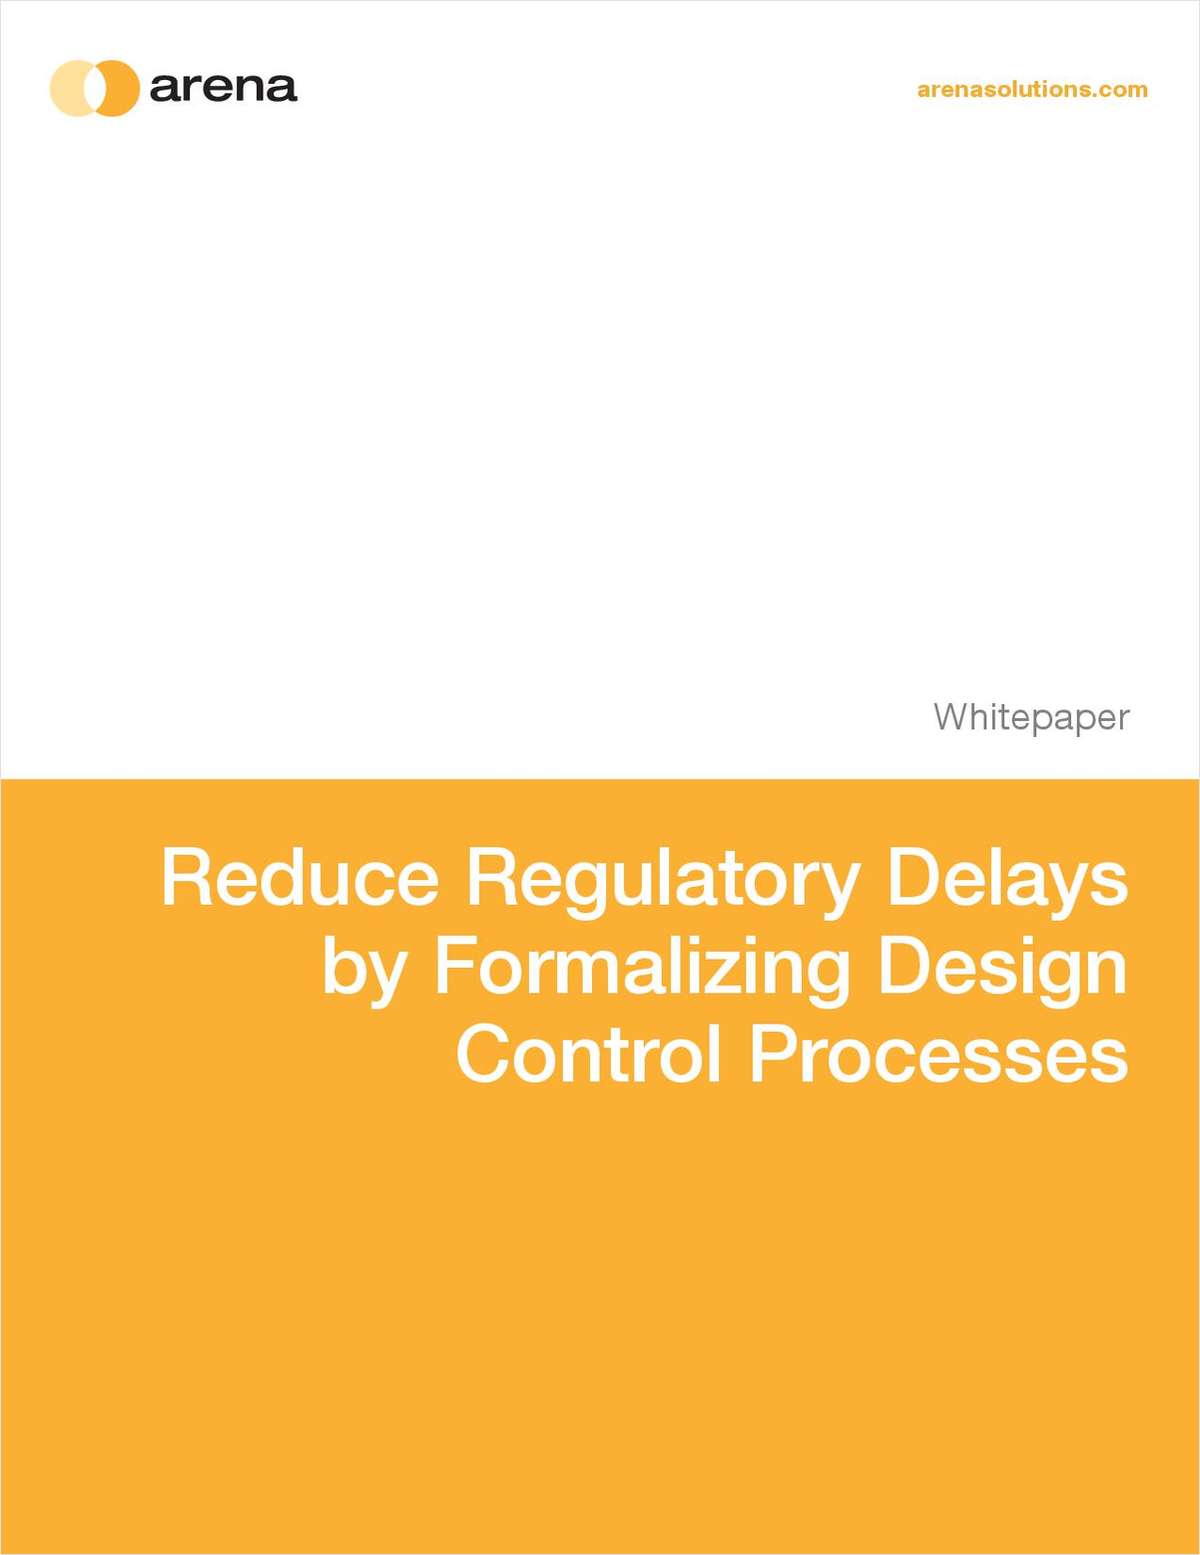 How to Reduce Regulatory Delays by Formalizing Design Processes